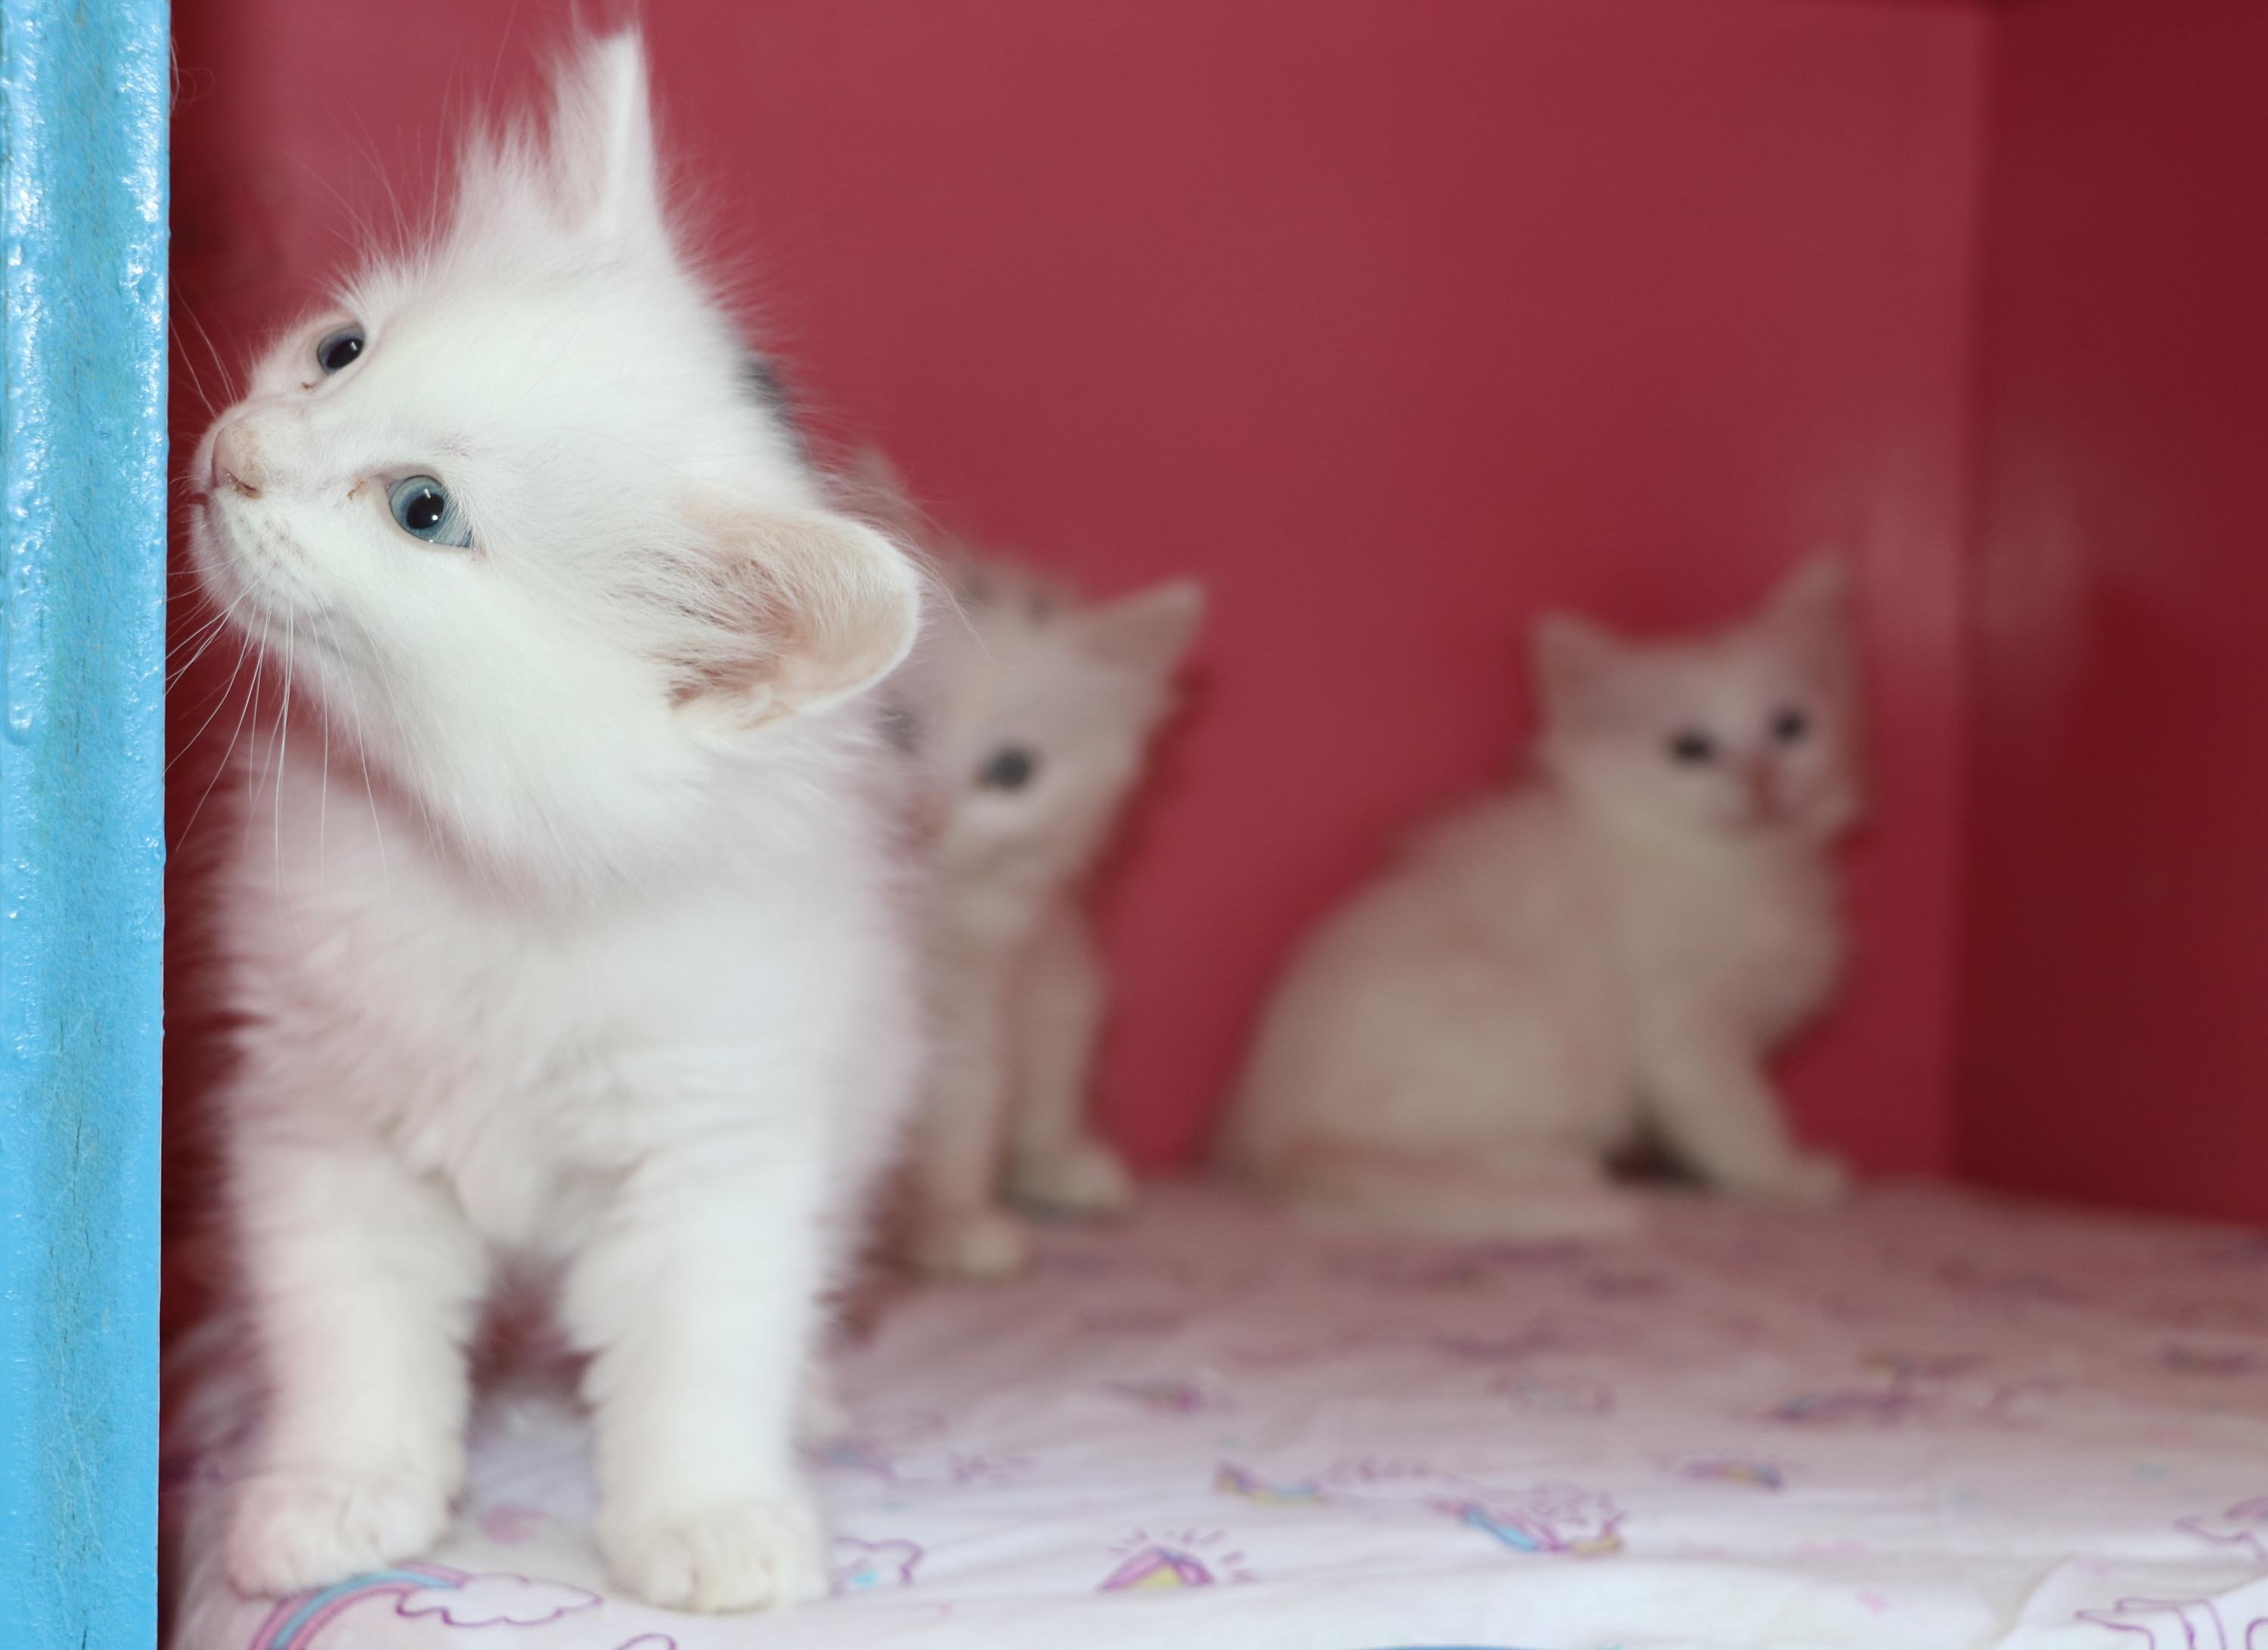 Proud mother: Well-known Van cat ‘Mia’ offers start to quadruplets